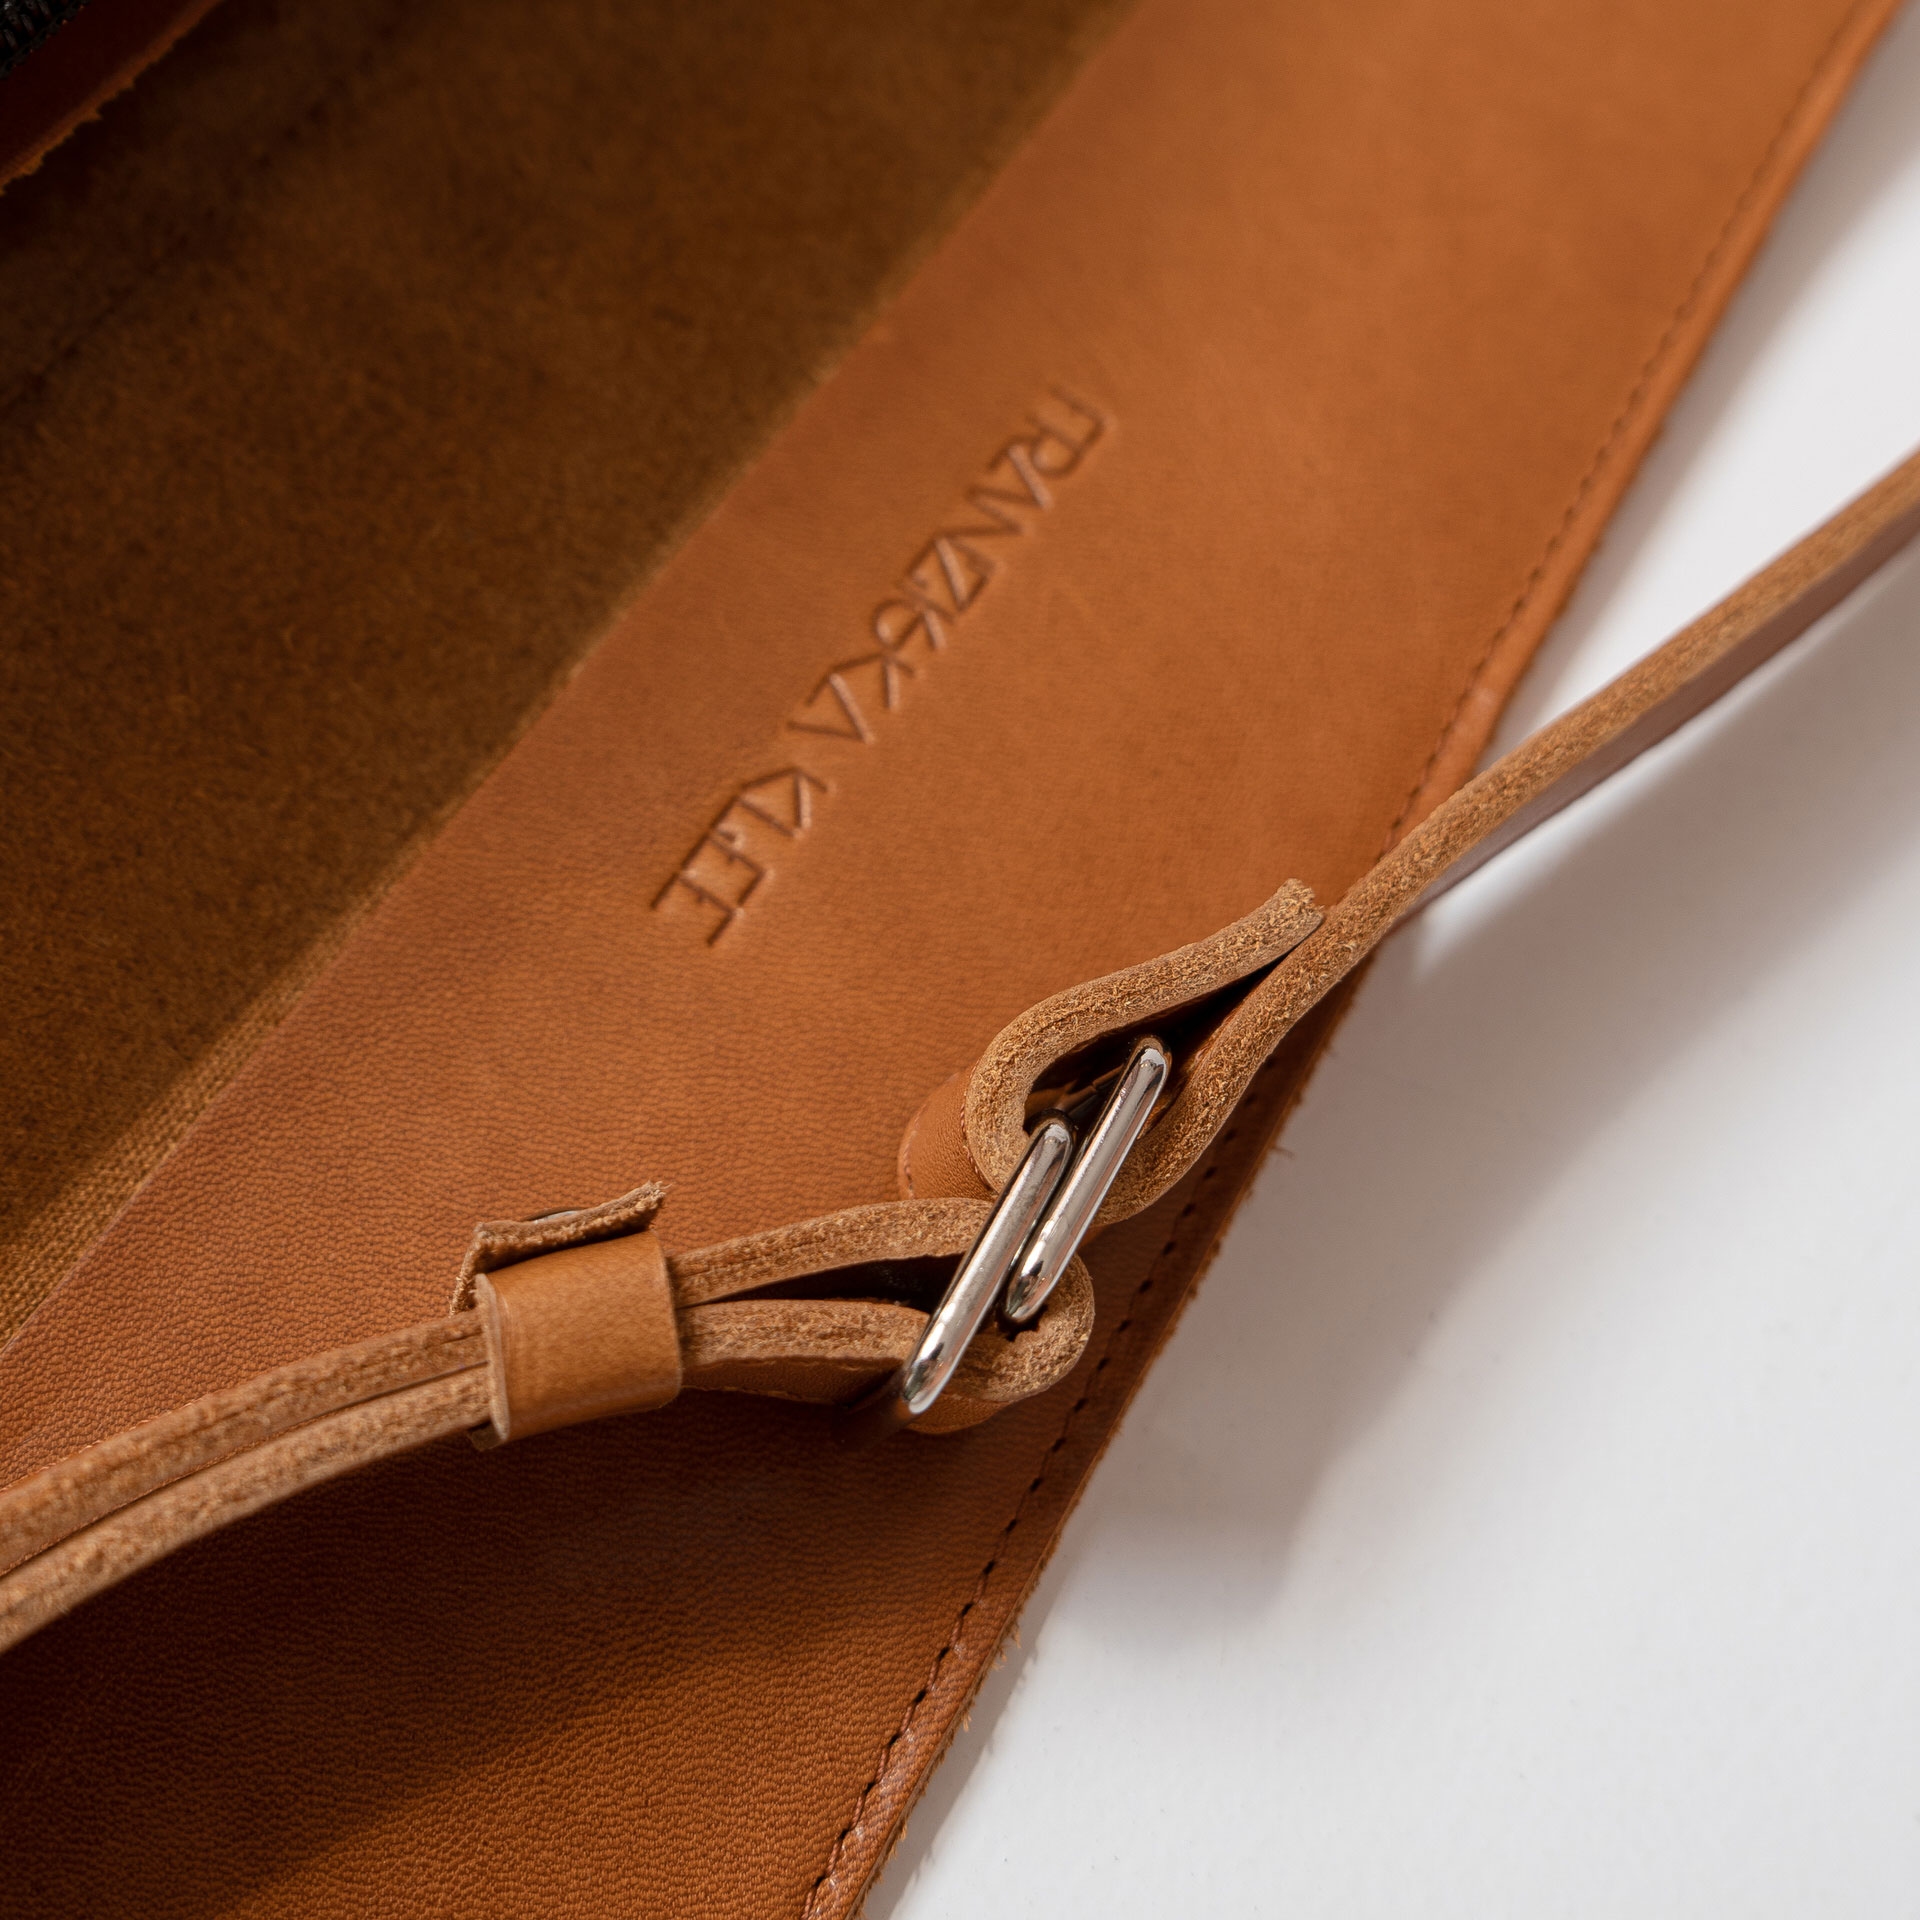 Detail Crossbody Bag TEA Large in the color cognac oiled.